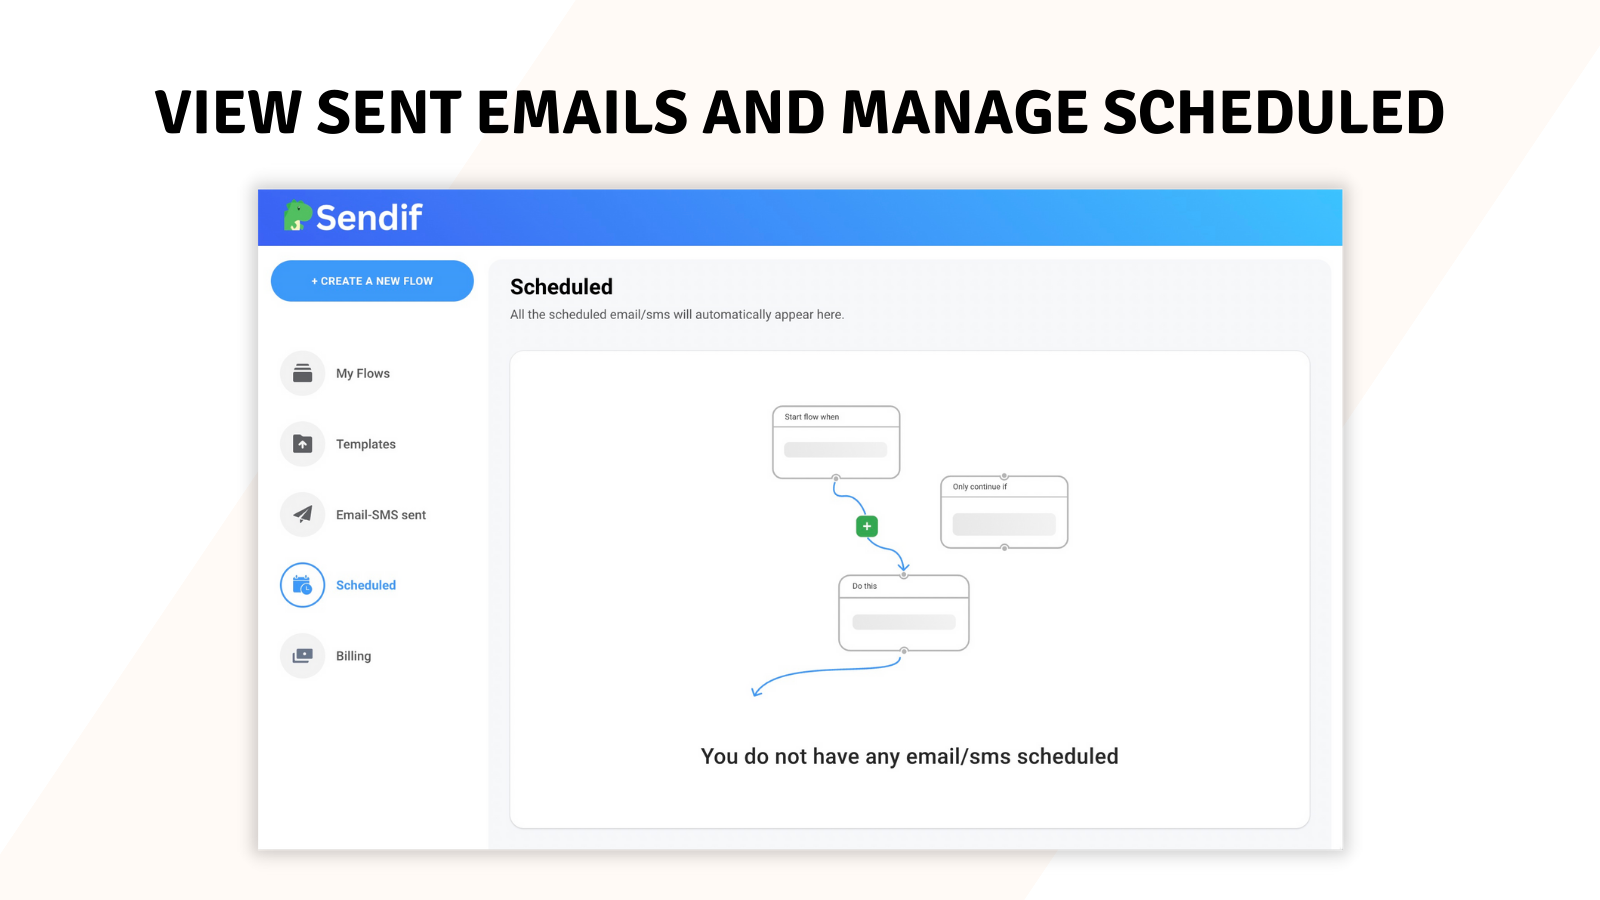 View sent and manage scheduled emails